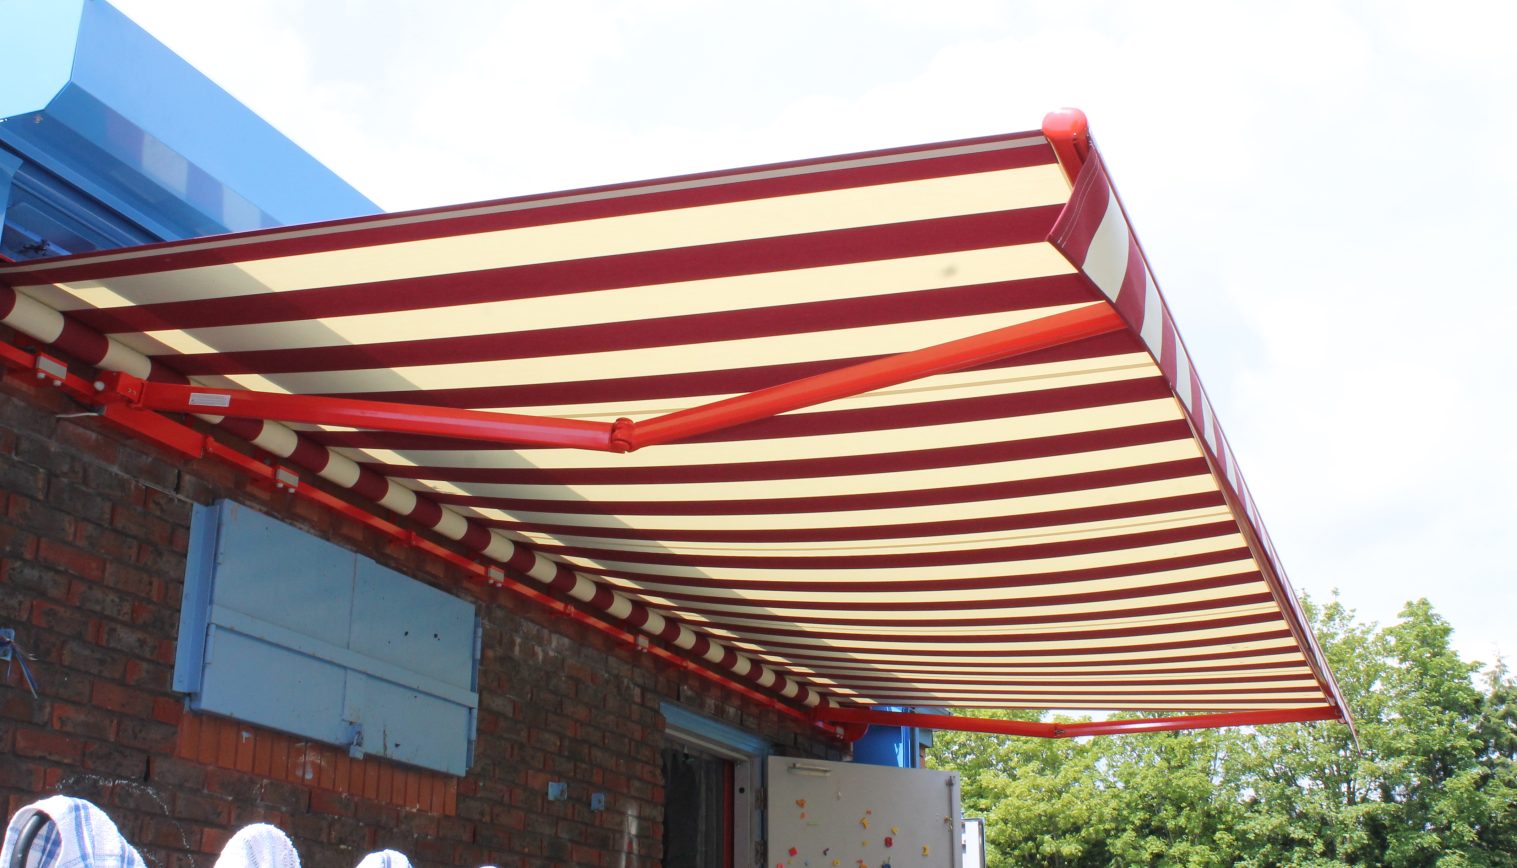 Cylch Meithrin Trelai – Commercial Awning